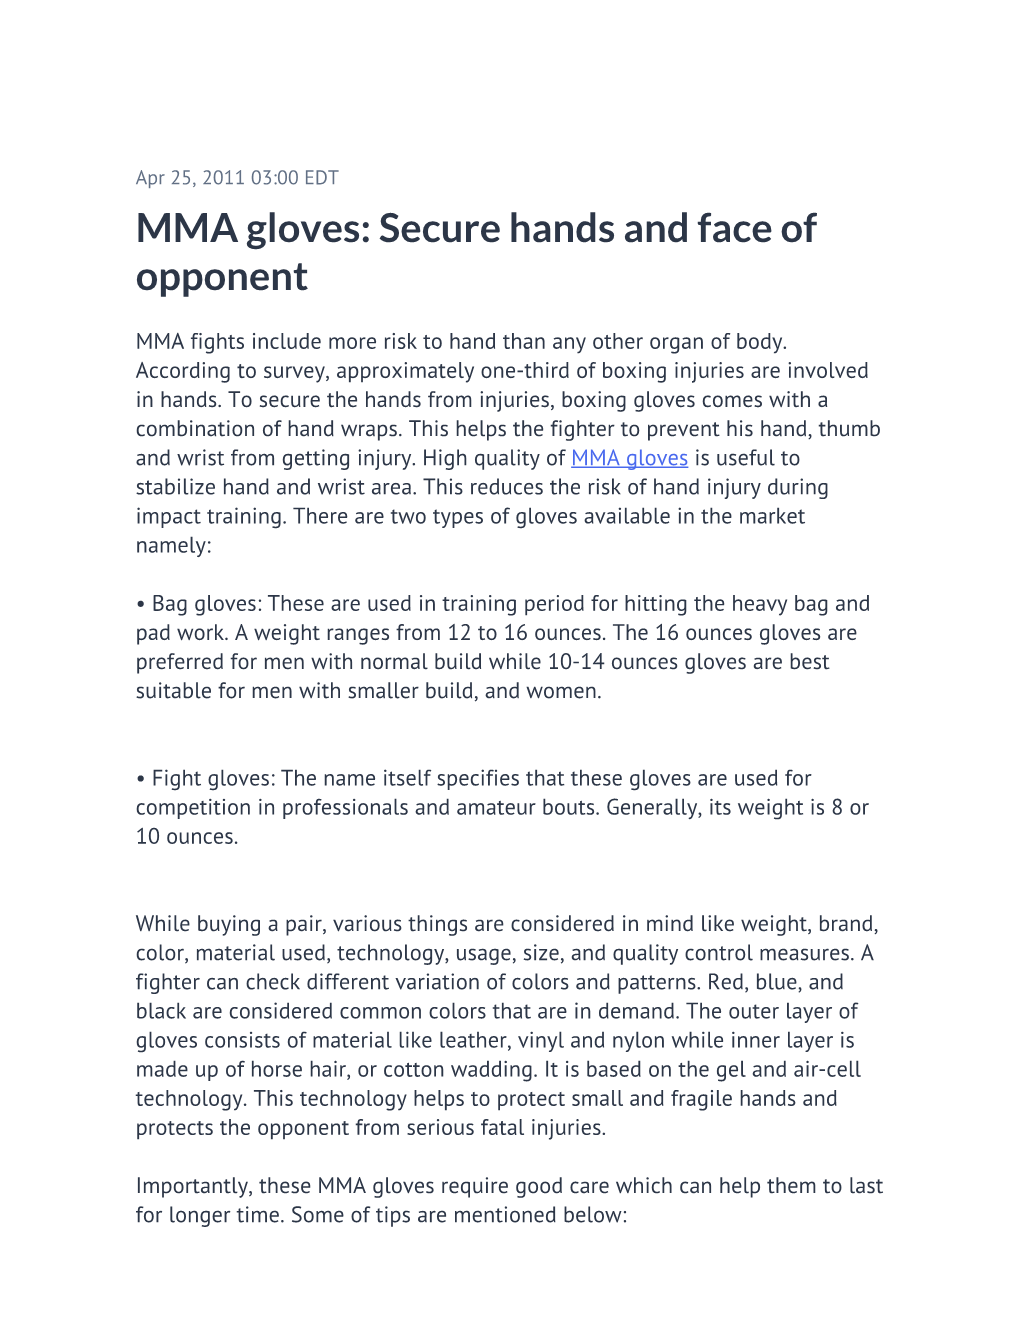 MMA Gloves: Secure Hands and Face of Opponent